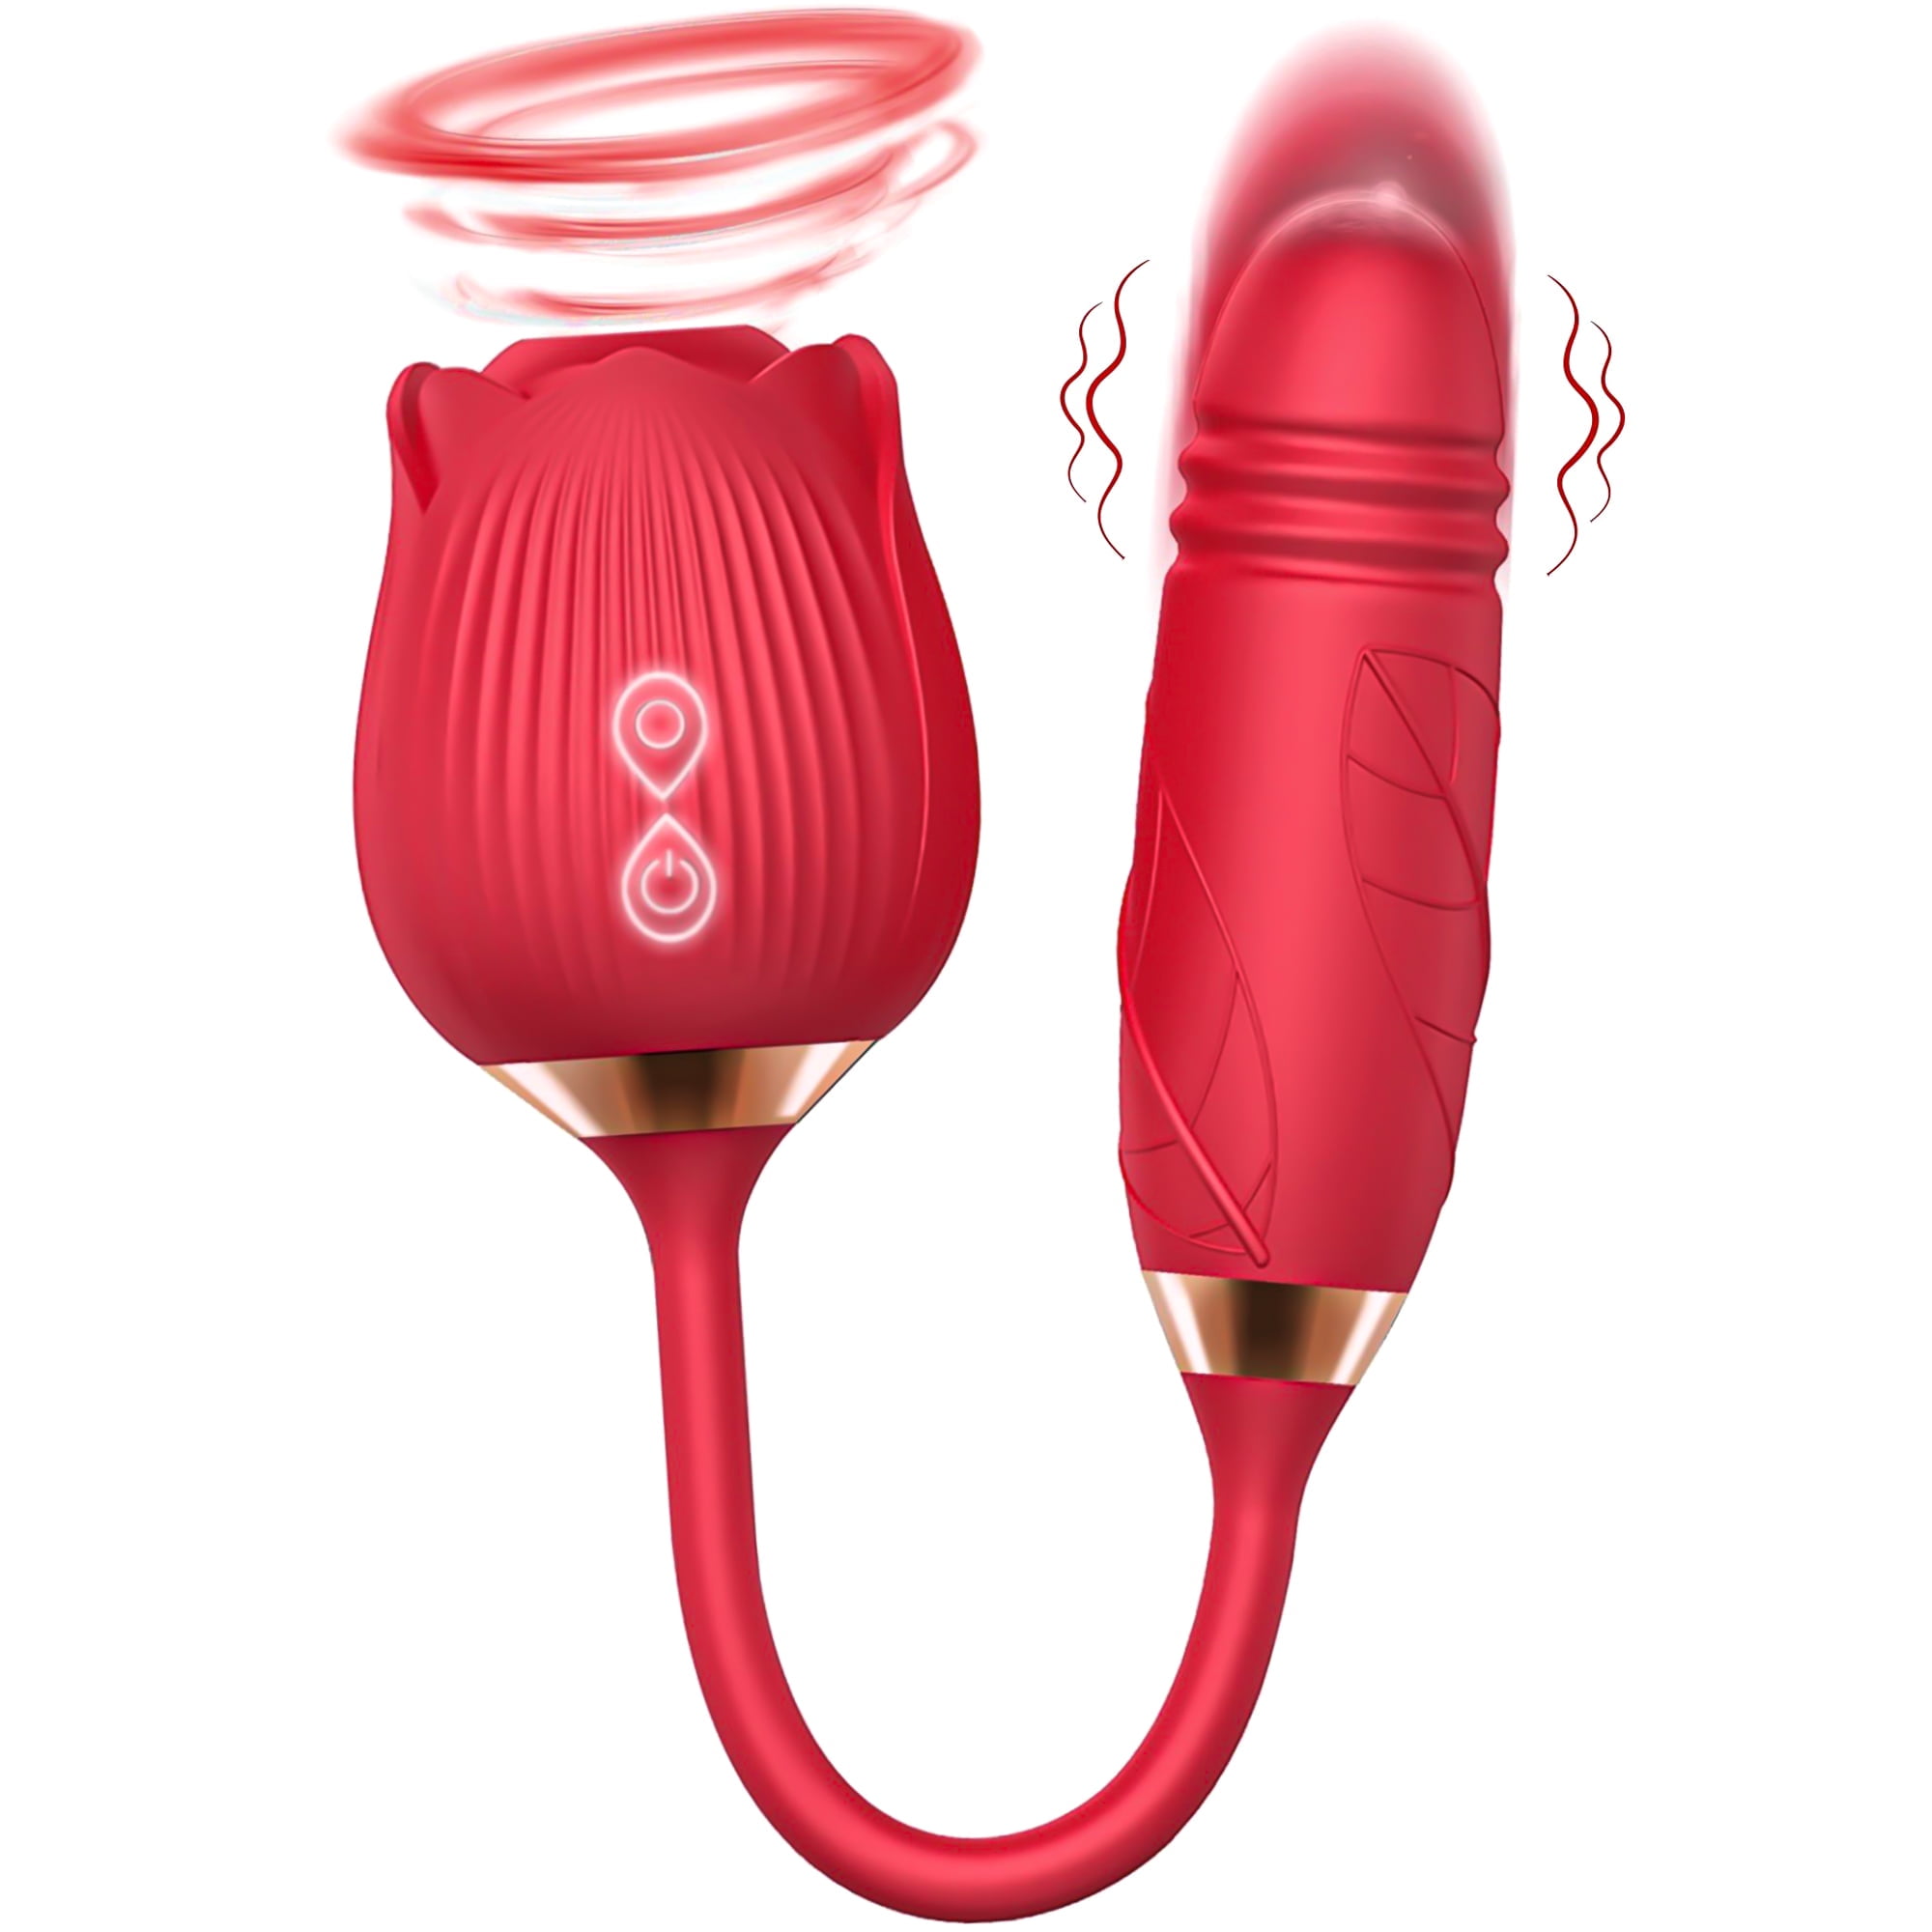 Rose Toy for Women - 2 in 1 Vibrator and Adult Sex Toys with Vibrating Egg, G Spot Clitoral Sex Accessories for Adults Couples -MMQ